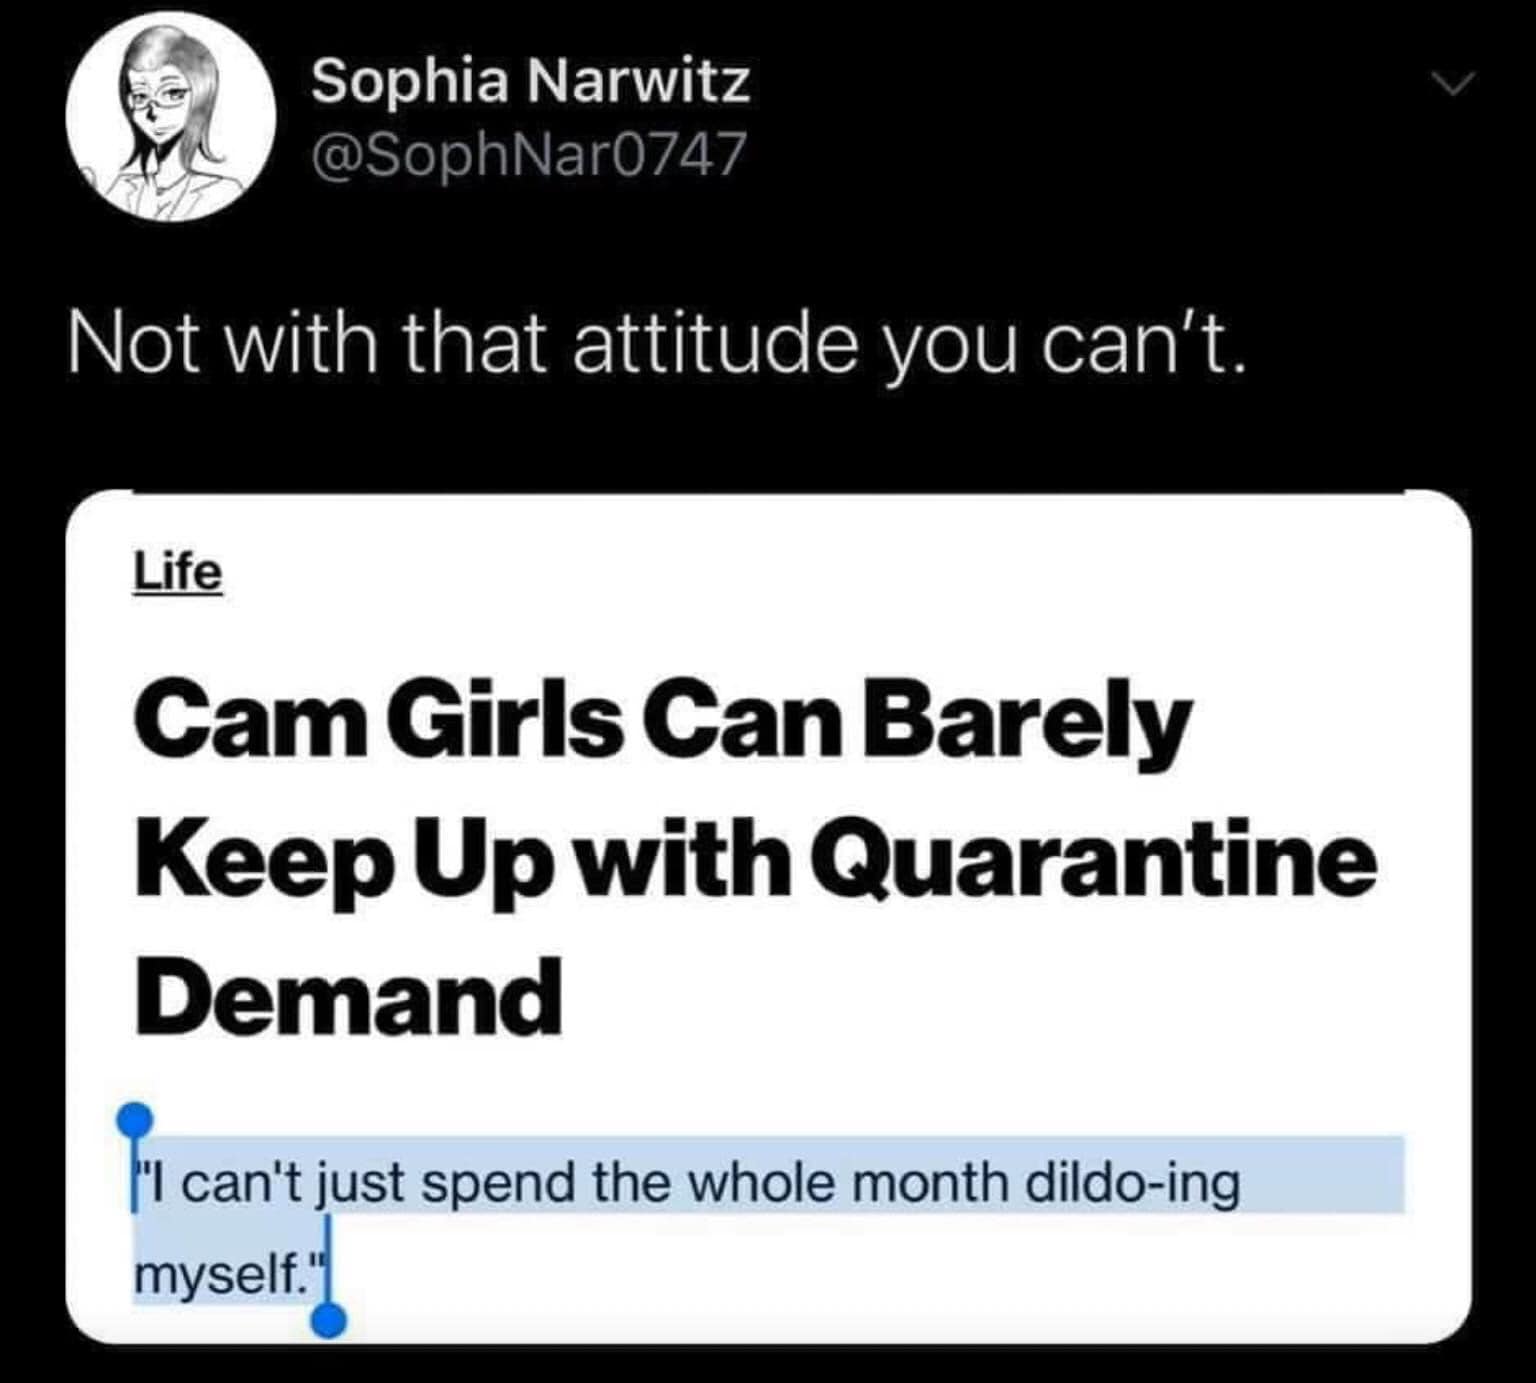 multimedia - Sophia Narwitz Not with that attitude you can't. Life Cam Girls Can Barely Keep Up with Quarantine Demand "I can't just spend the whole month dildoing myself."